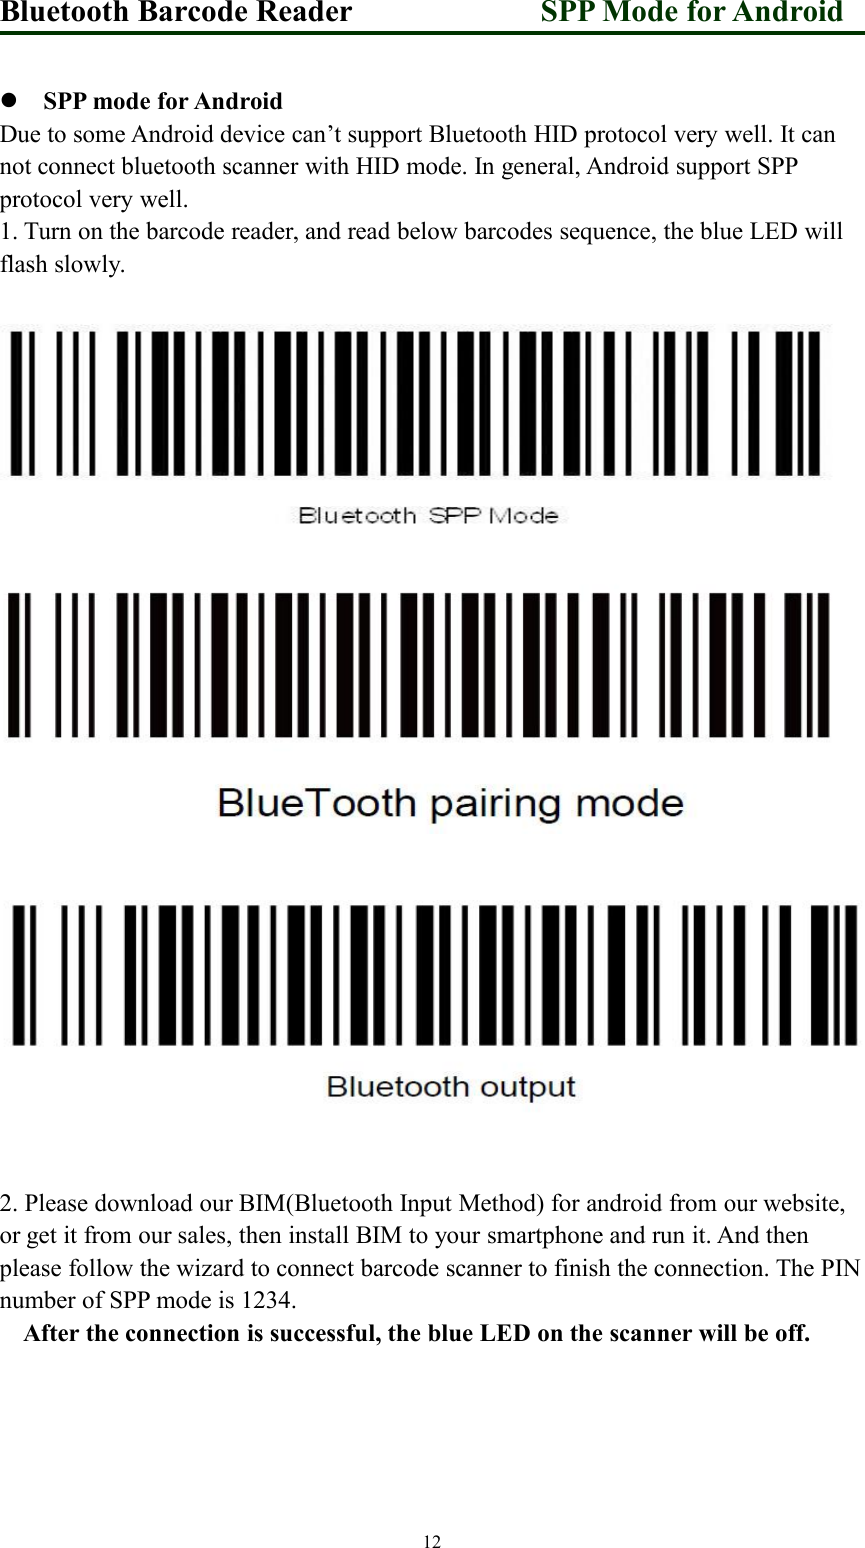 Bluetooth Barcode Reader SPP Mode for Android12SPP mode for AndroidDue to some Android device can’t support Bluetooth HID protocol very well. It cannot connect bluetooth scanner with HID mode. In general, Android support SPPprotocol very well.1. Turn on the barcode reader, and read below barcodes sequence, the blue LED willflash slowly.2. Please download our BIM(Bluetooth Input Method) for android from our website,or get it from our sales, then install BIM to your smartphone and run it. And thenplease follow the wizard to connect barcode scanner to finish the connection. The PINnumber of SPP mode is 1234.After the connection is successful, the blue LED on the scanner will be off.